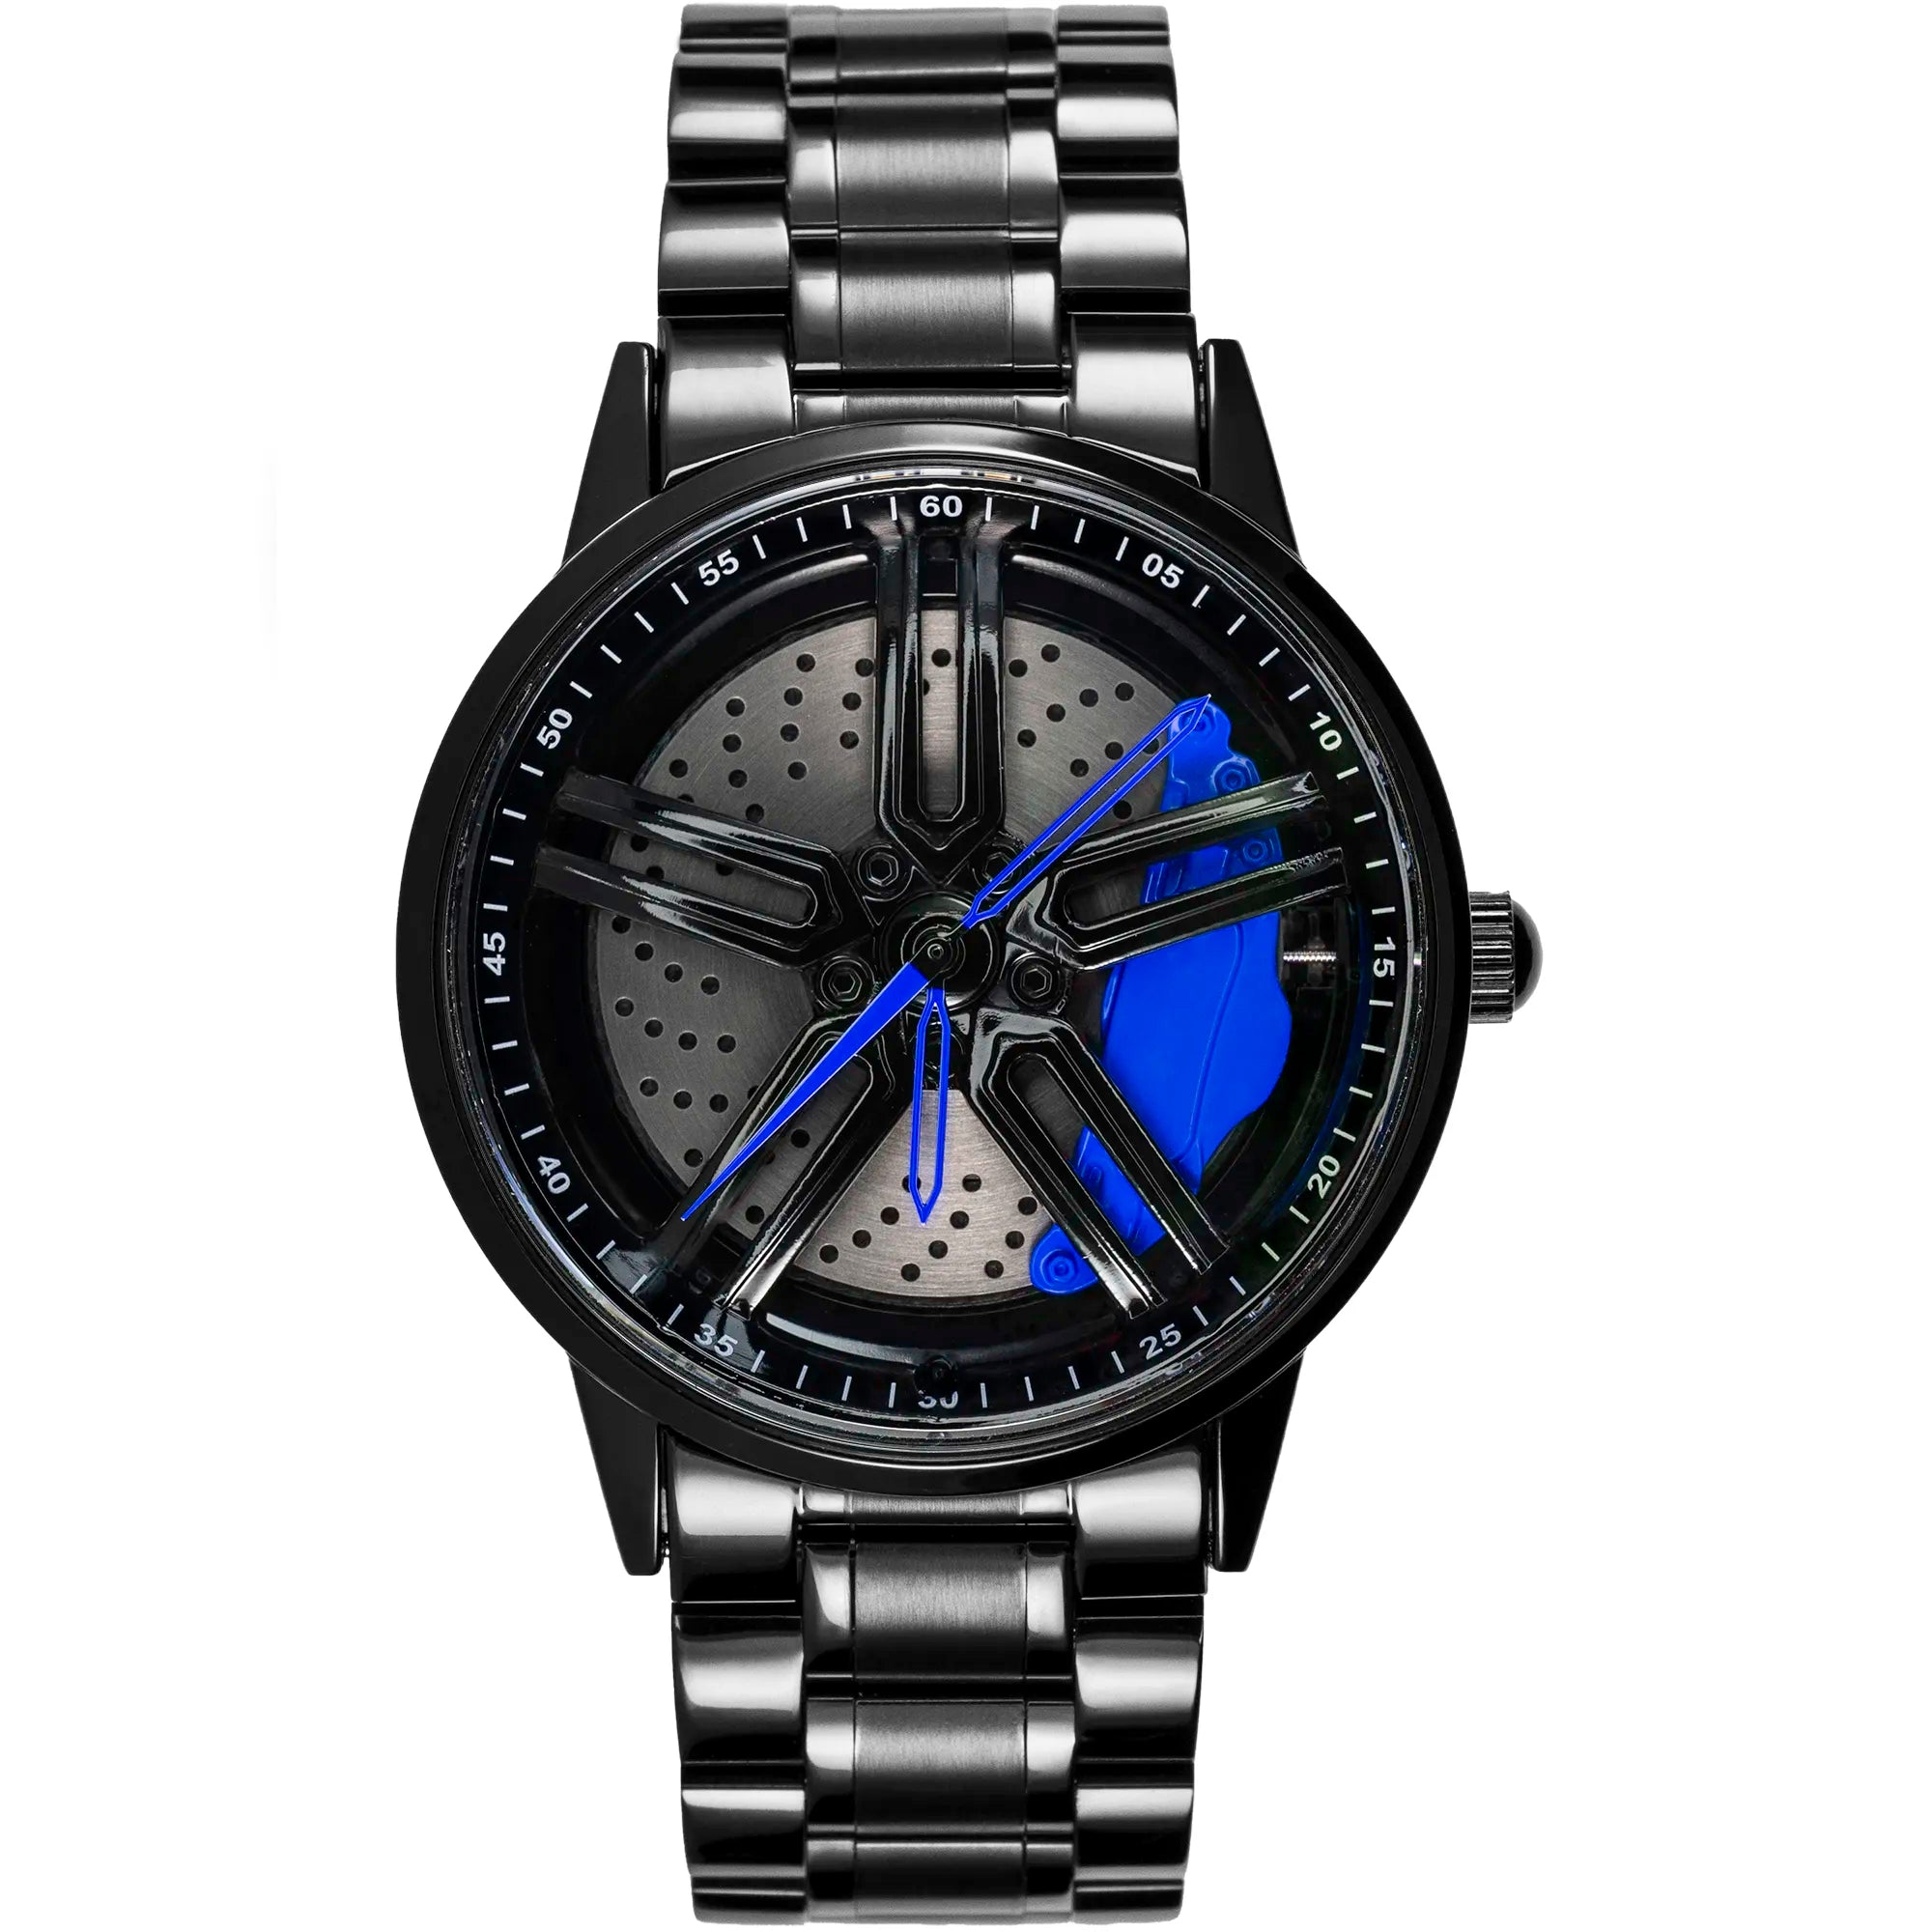 360 spinner watch for serious boys and men | Watches for men, Mens watches  black, School trends